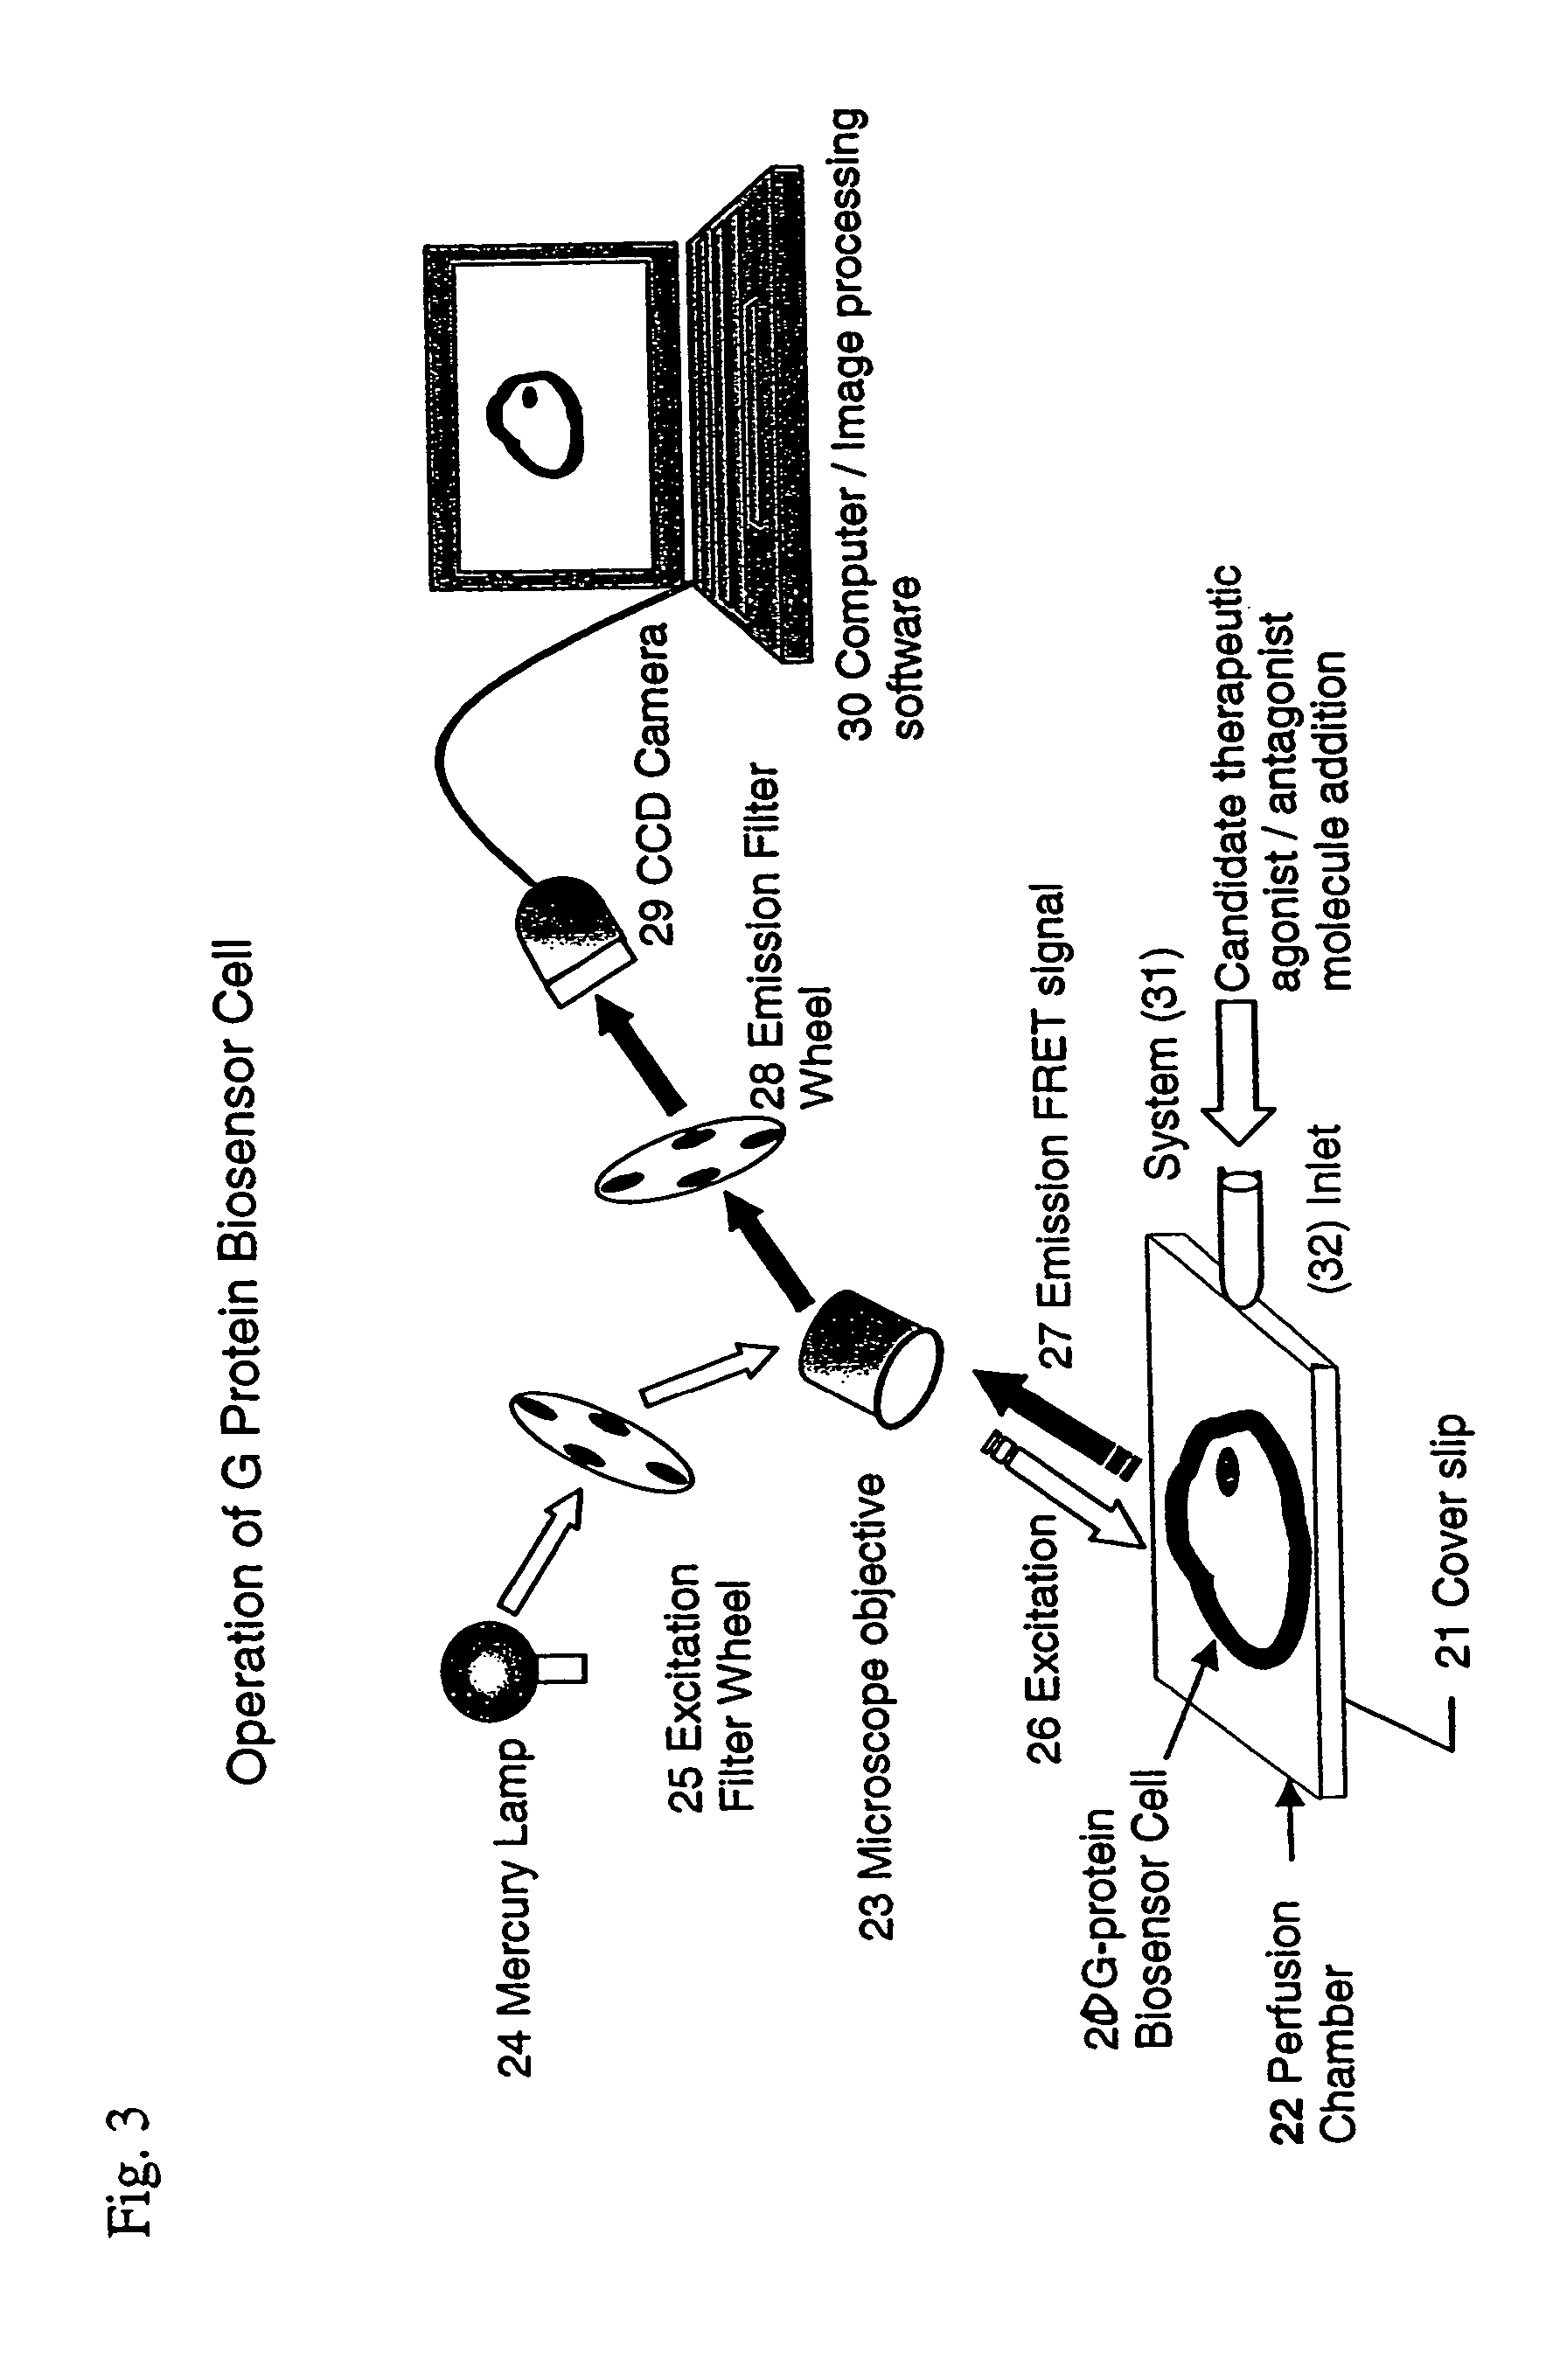 Biosensor and use thereof to identify therapeutic drug molecules and molecules binding orphan receptors